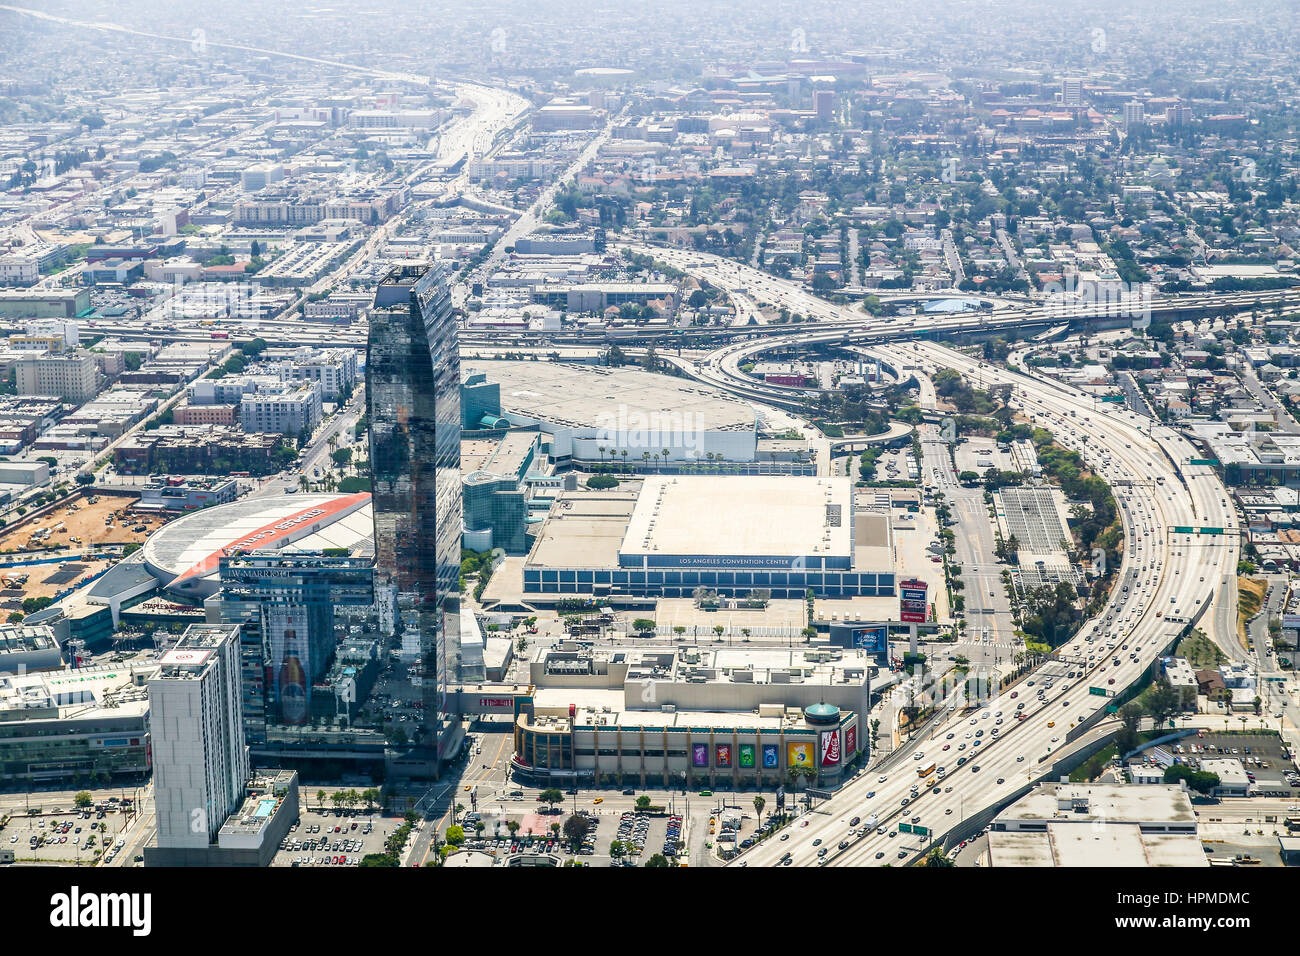 Los Angeles, USA - May 27, 2015: Aerial view of a part of Downtown Los Angeles with the Staples Center and Interstate 110. Stock Photo